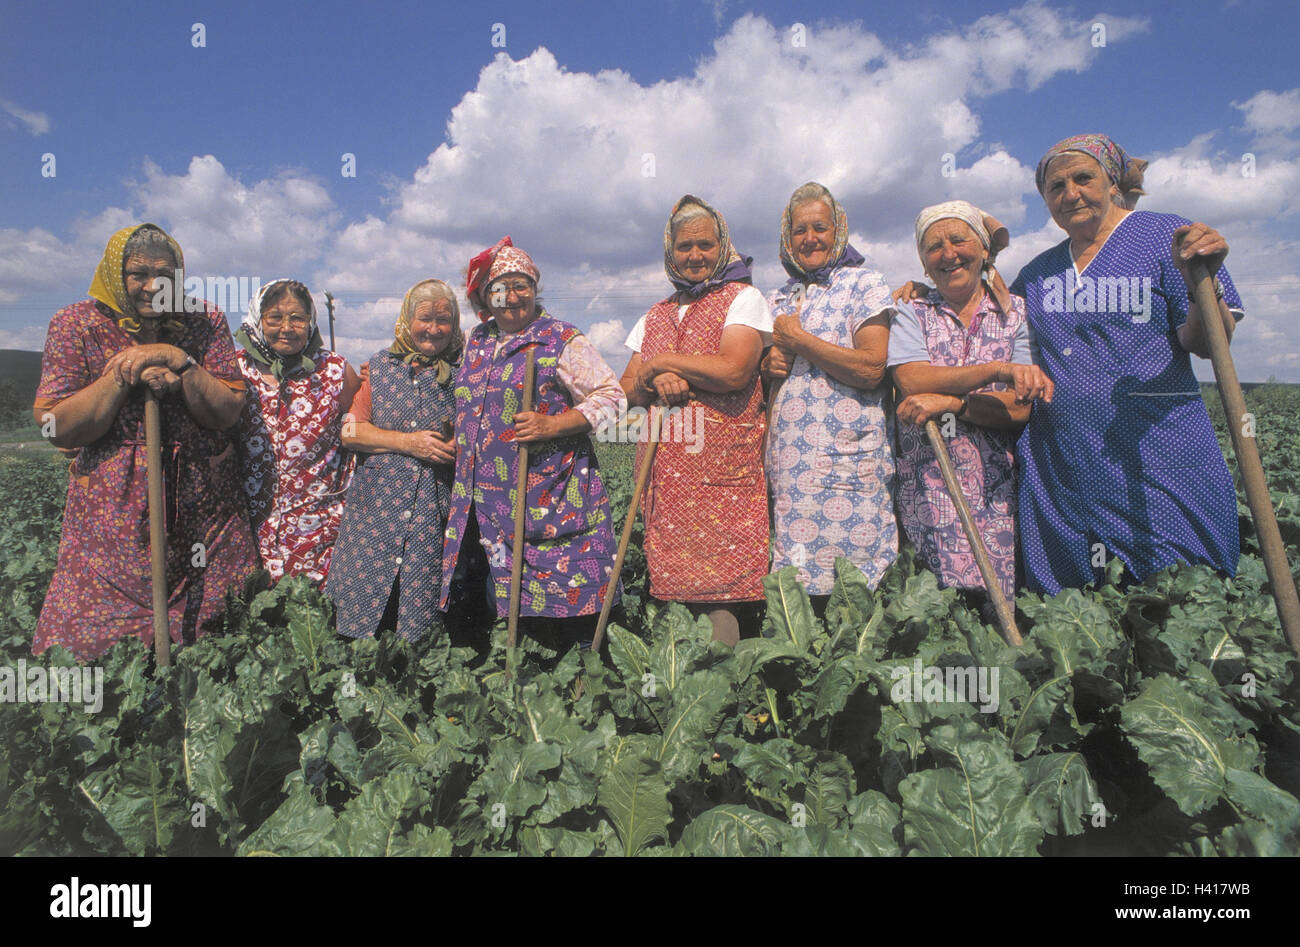 Czech Republic, Moravia, mangold field, farmers, group picture, person, locals, senior citizens, women, group, old, seniors, headscarfs, laugh, work friendly, happy, satisfaction, laboriously, together, agriculture, field economy, work, smock apron, field Stock Photo